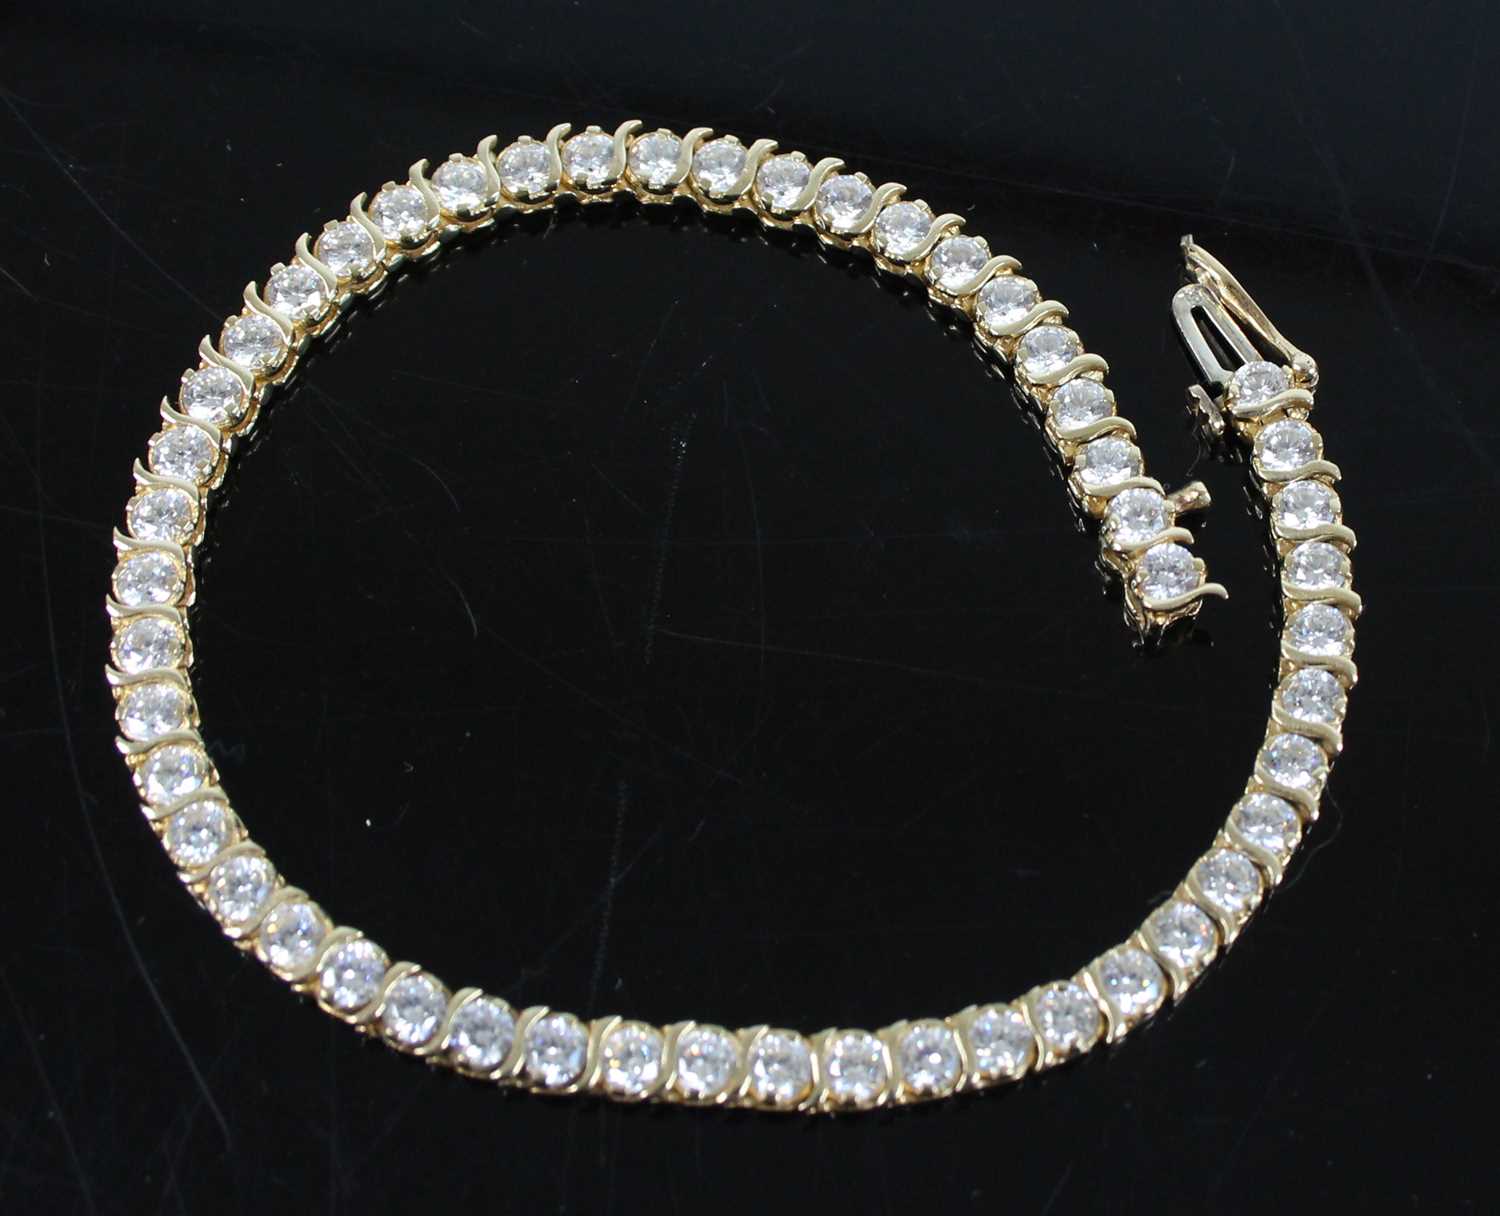 A yellow metal cubic zirconia tennis bracelet, featuring fifty-one 3 x 1.9mm round cubic zirconia in